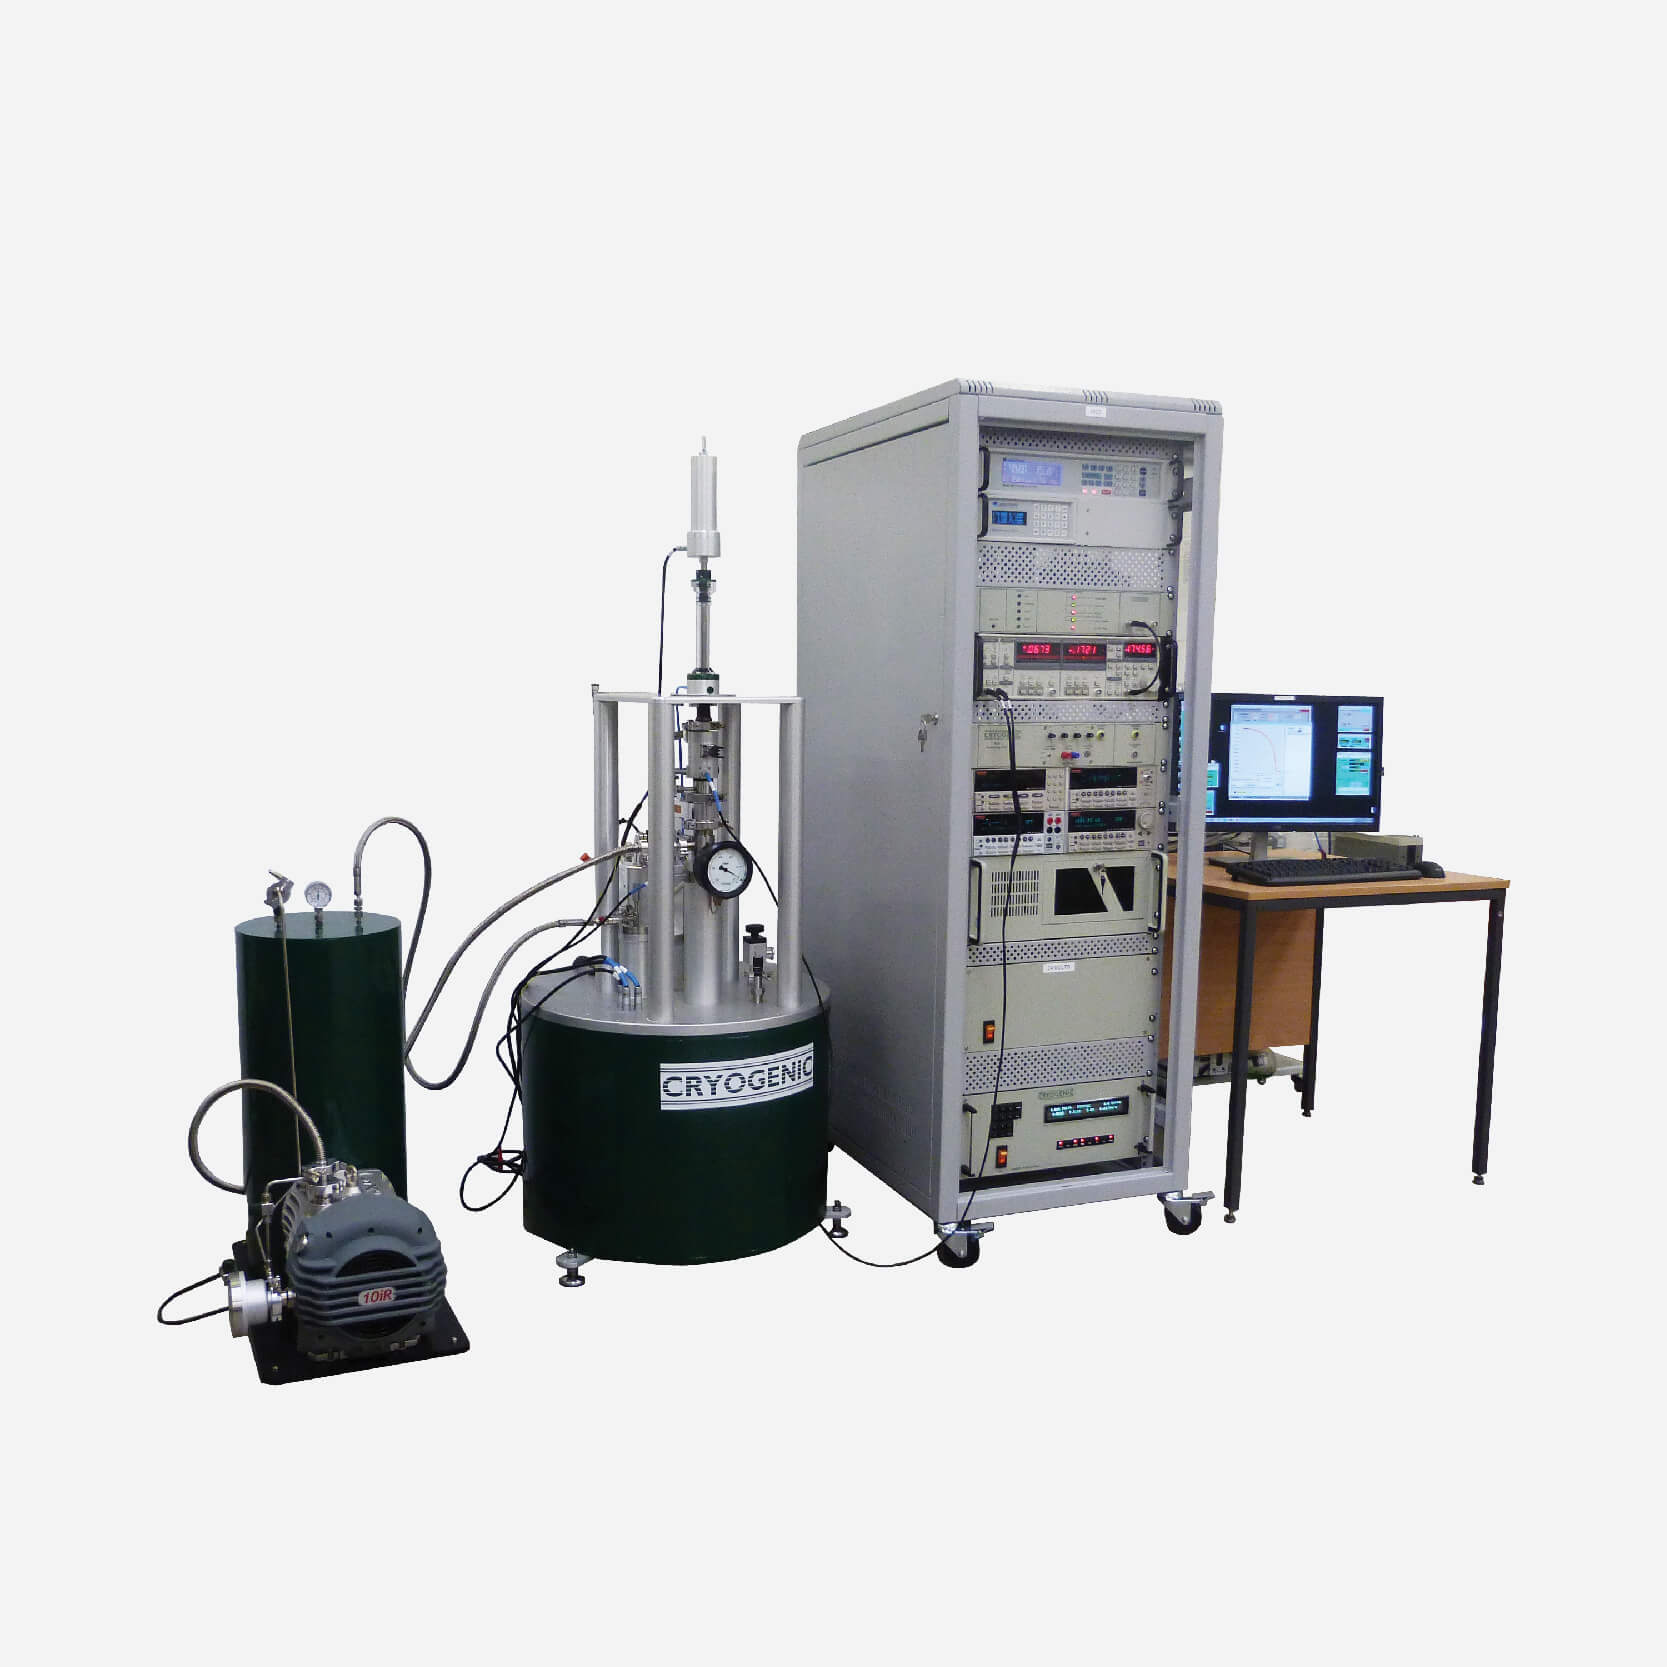 Cryogenic Materials Characterization System